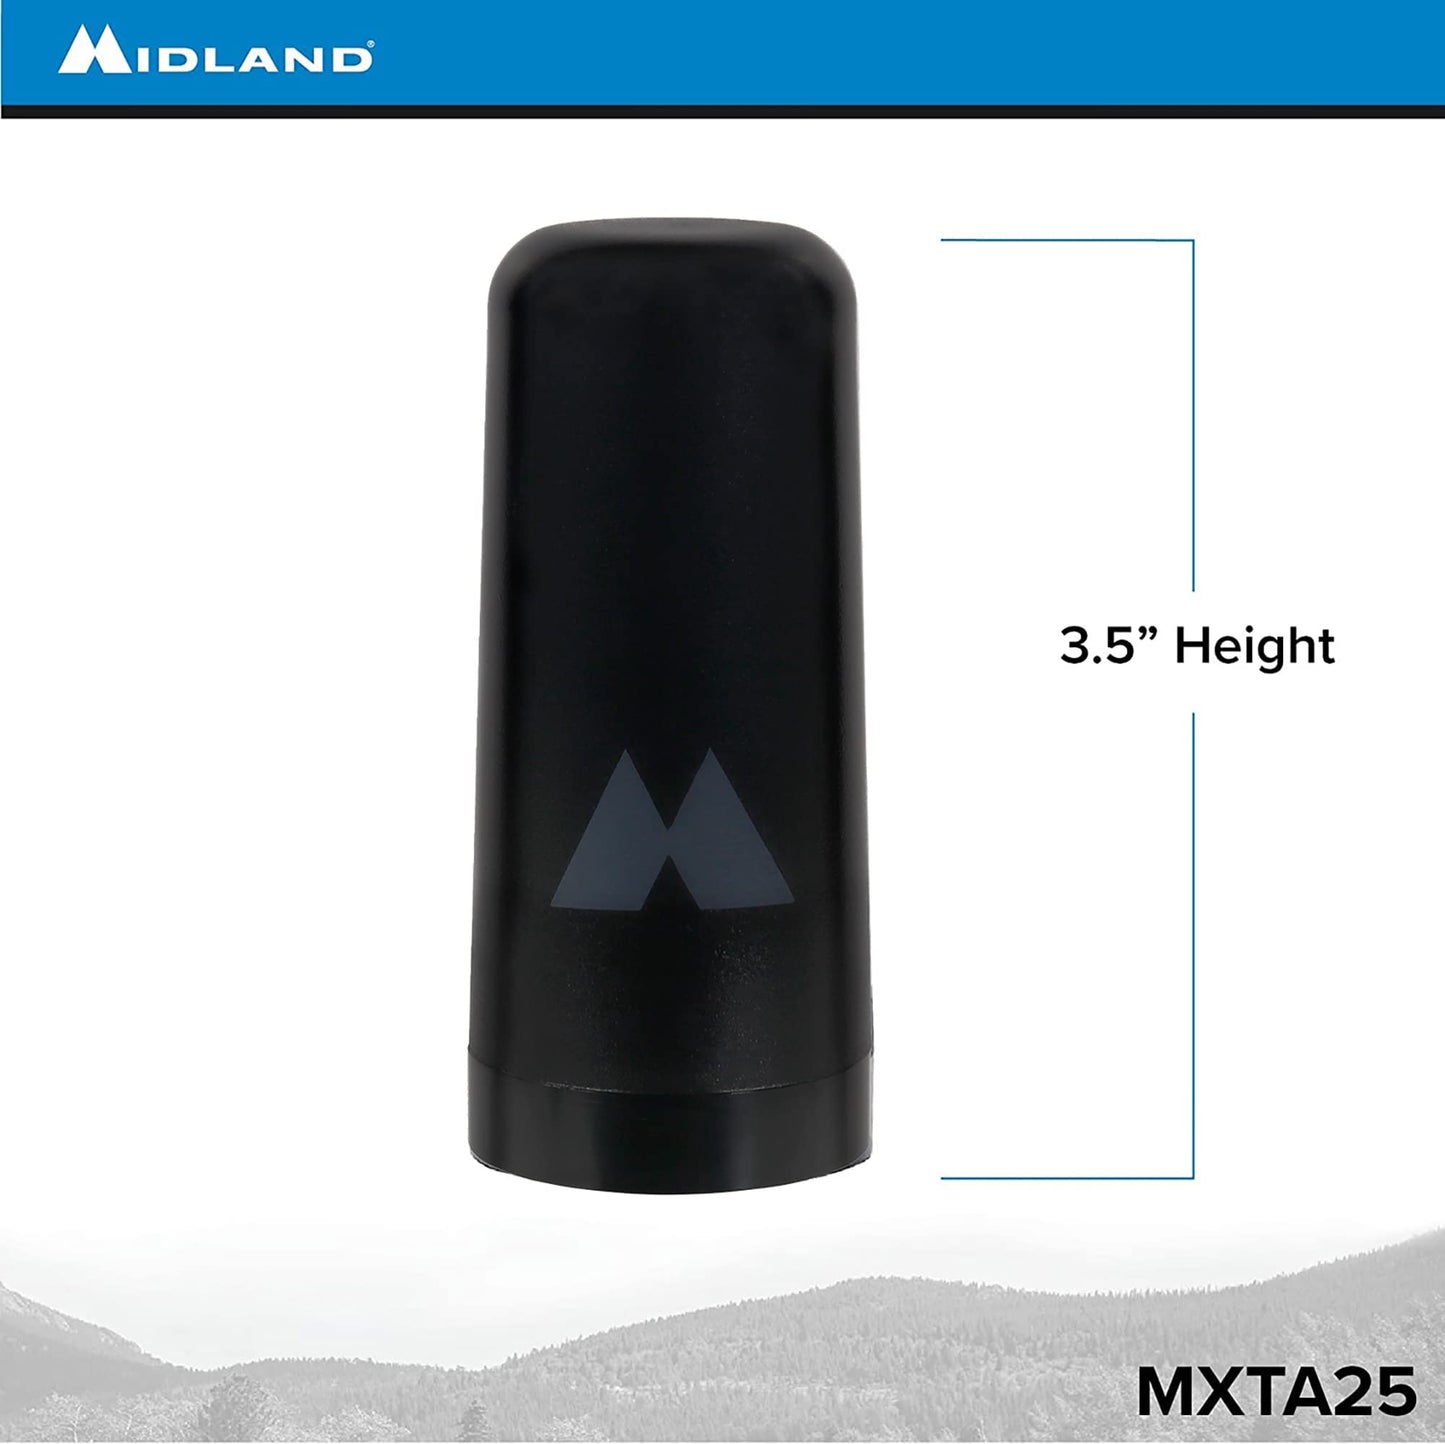 Midland MXTA25 3dB MicroMobile Compatible Gain Ghost Antenna